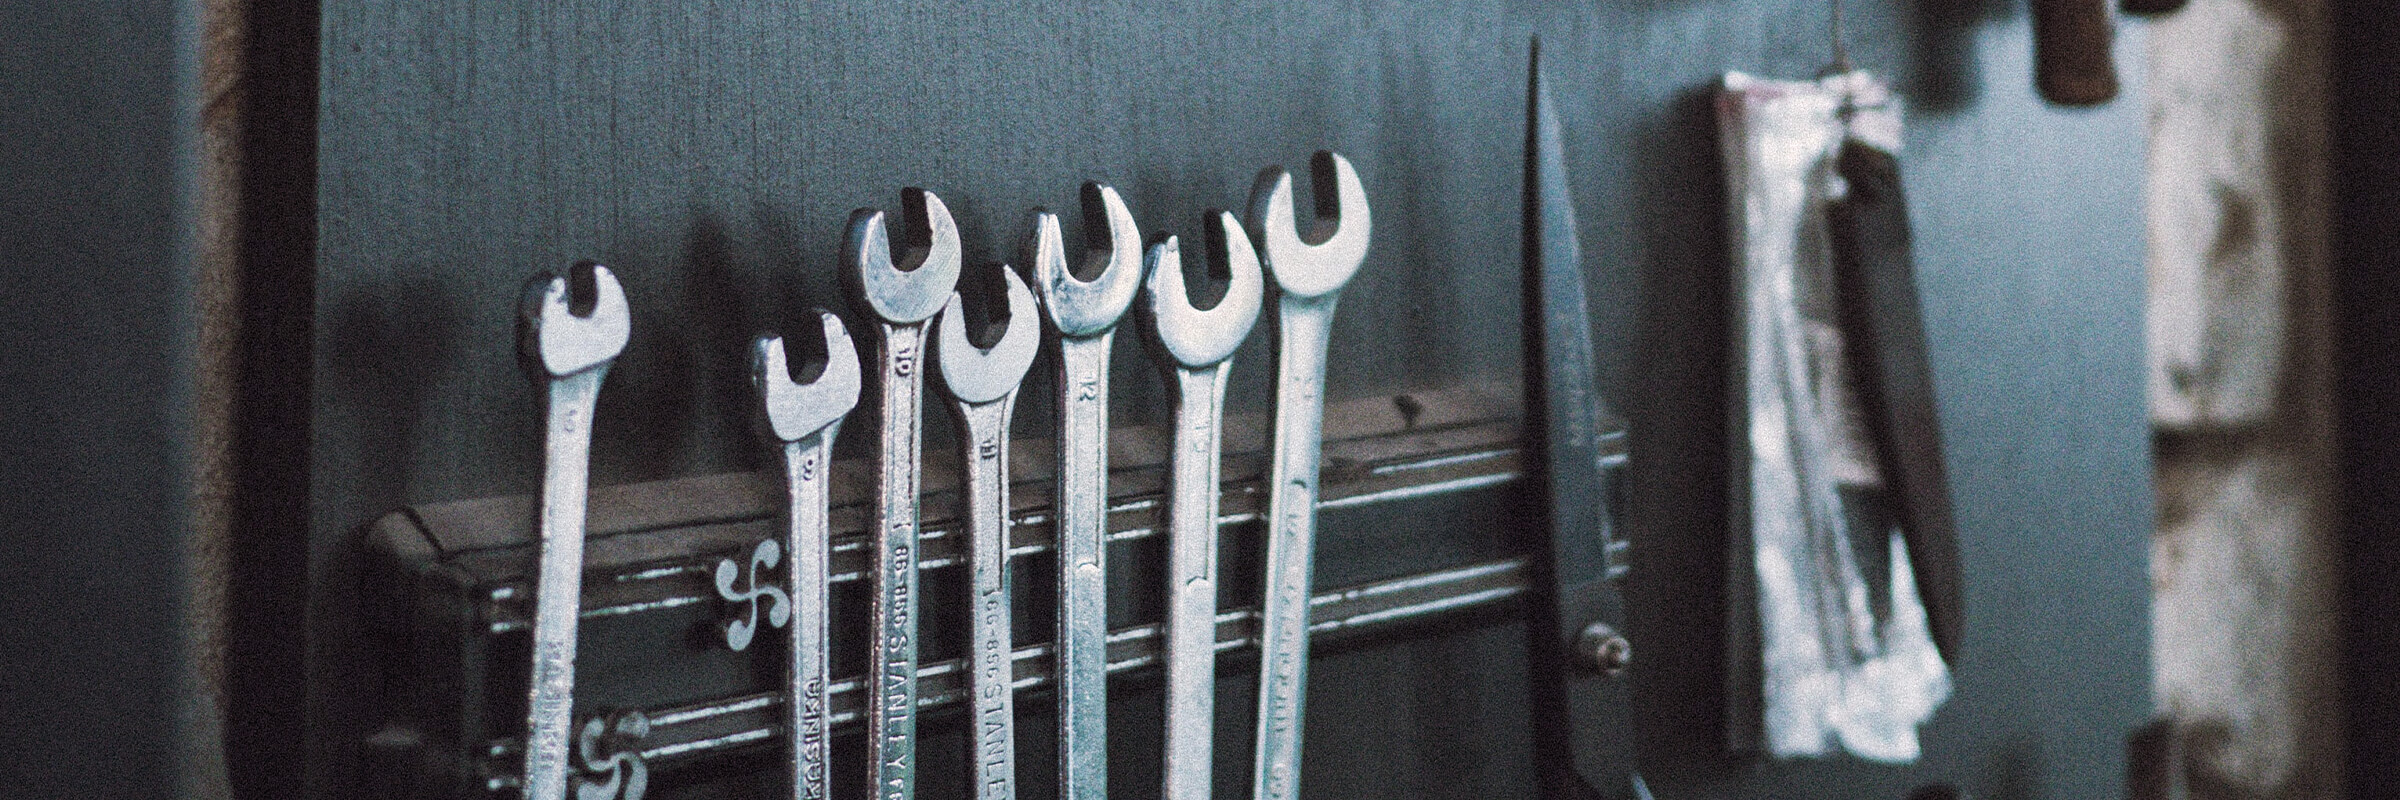 5 Essential Tools in a Service Technician's Toolbox